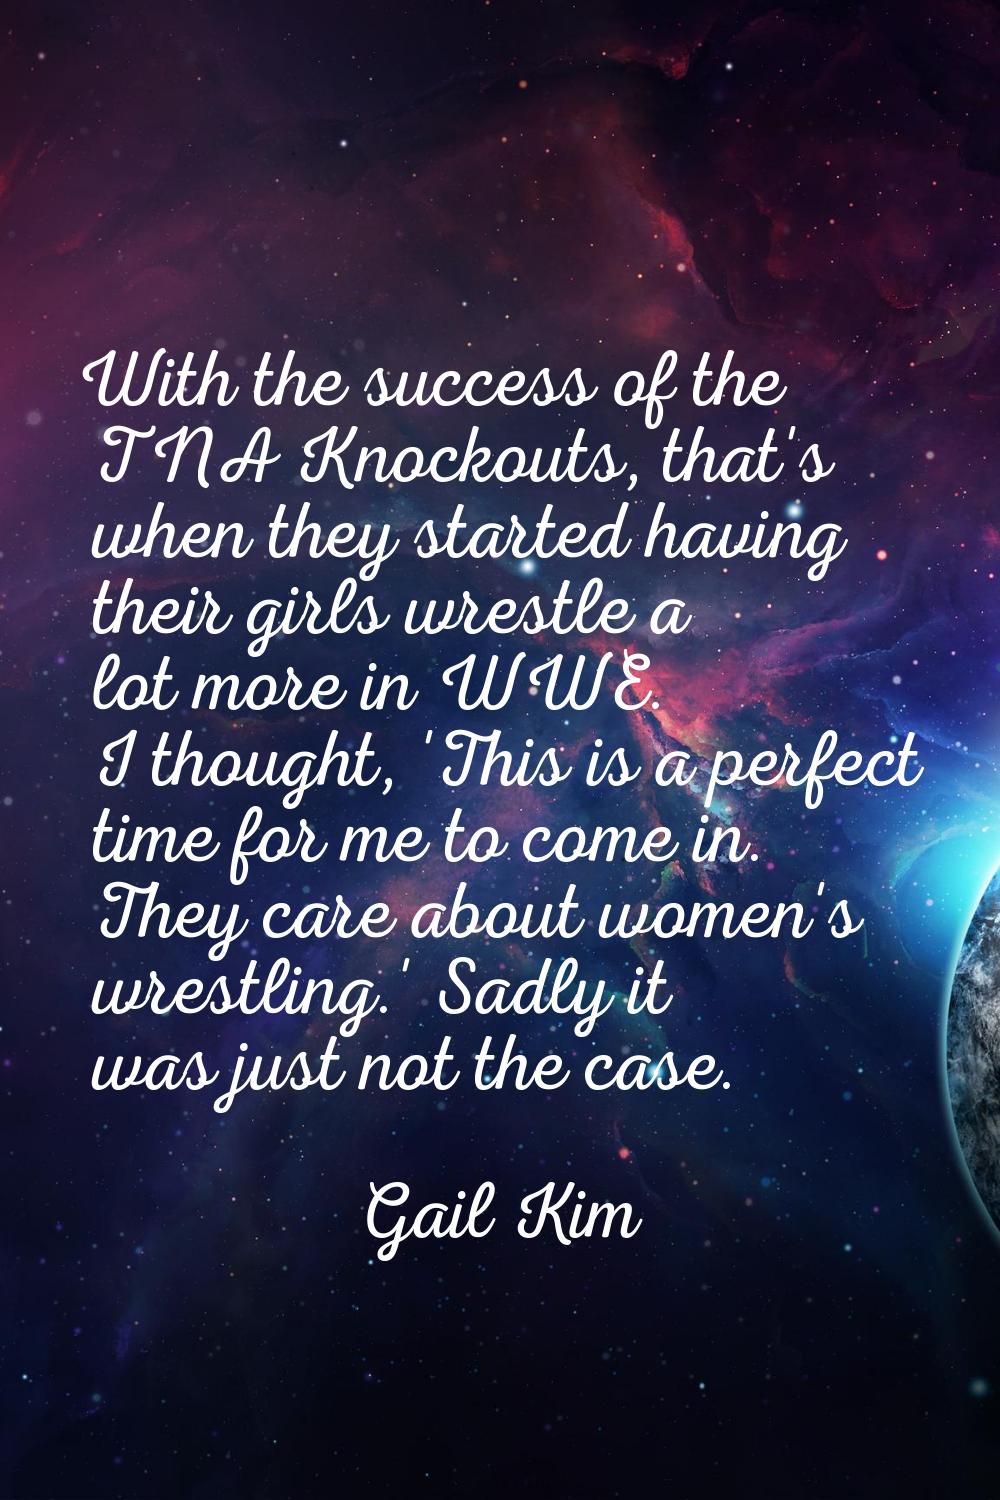 With the success of the TNA Knockouts, that's when they started having their girls wrestle a lot mo